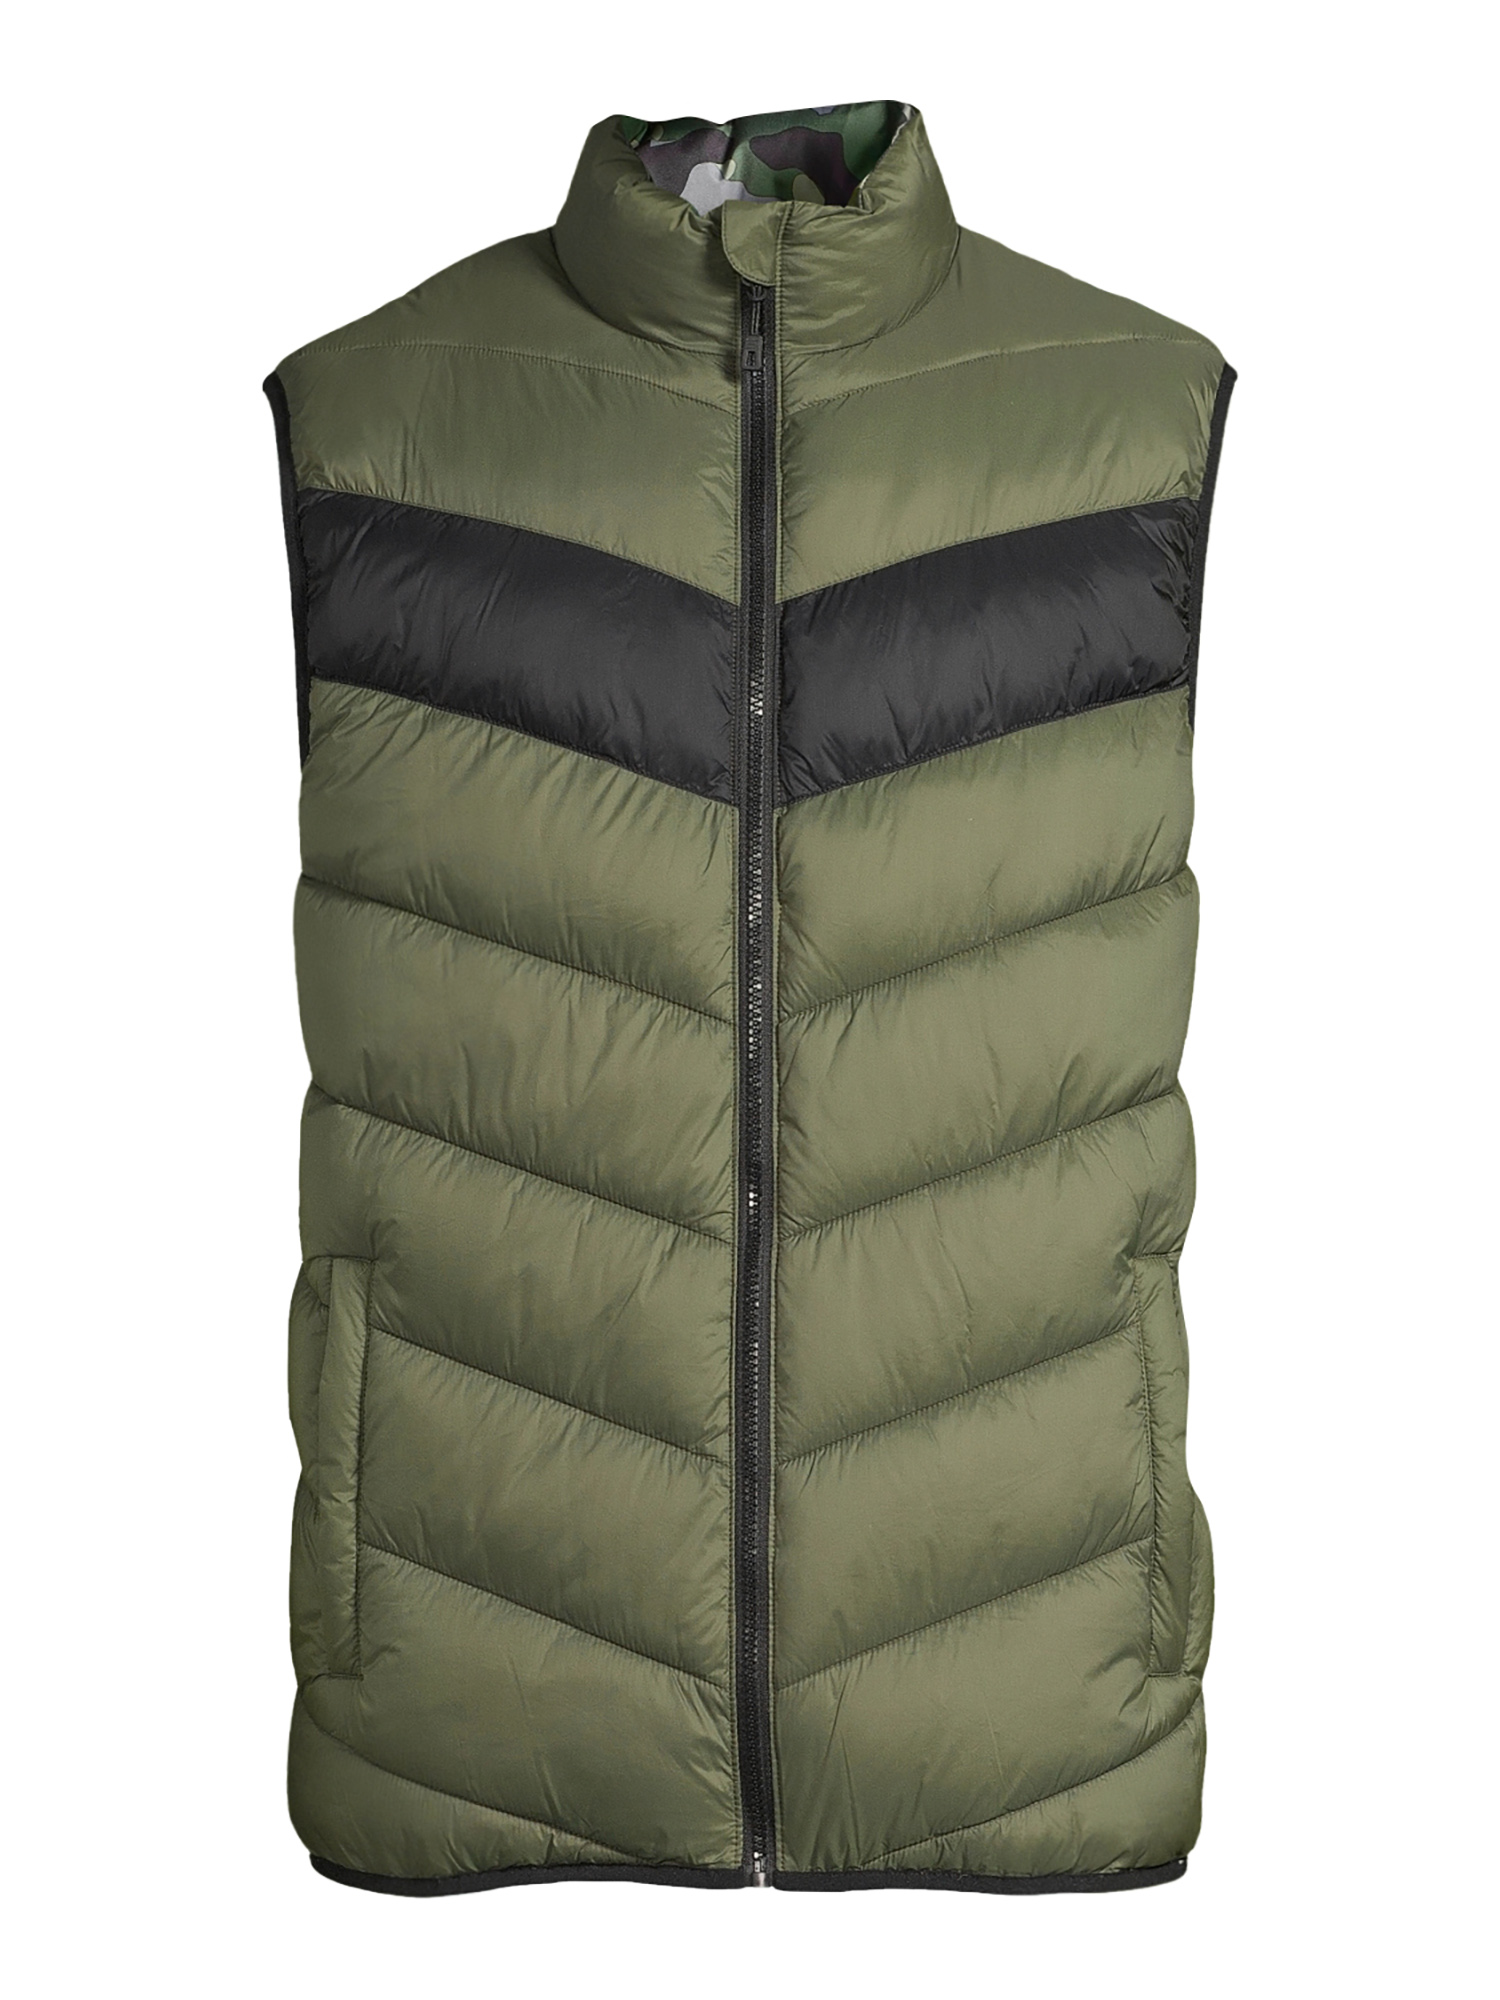 Swiss Tech Men's Reversible Puffer Vest, Up to Size 3XL - image 5 of 5